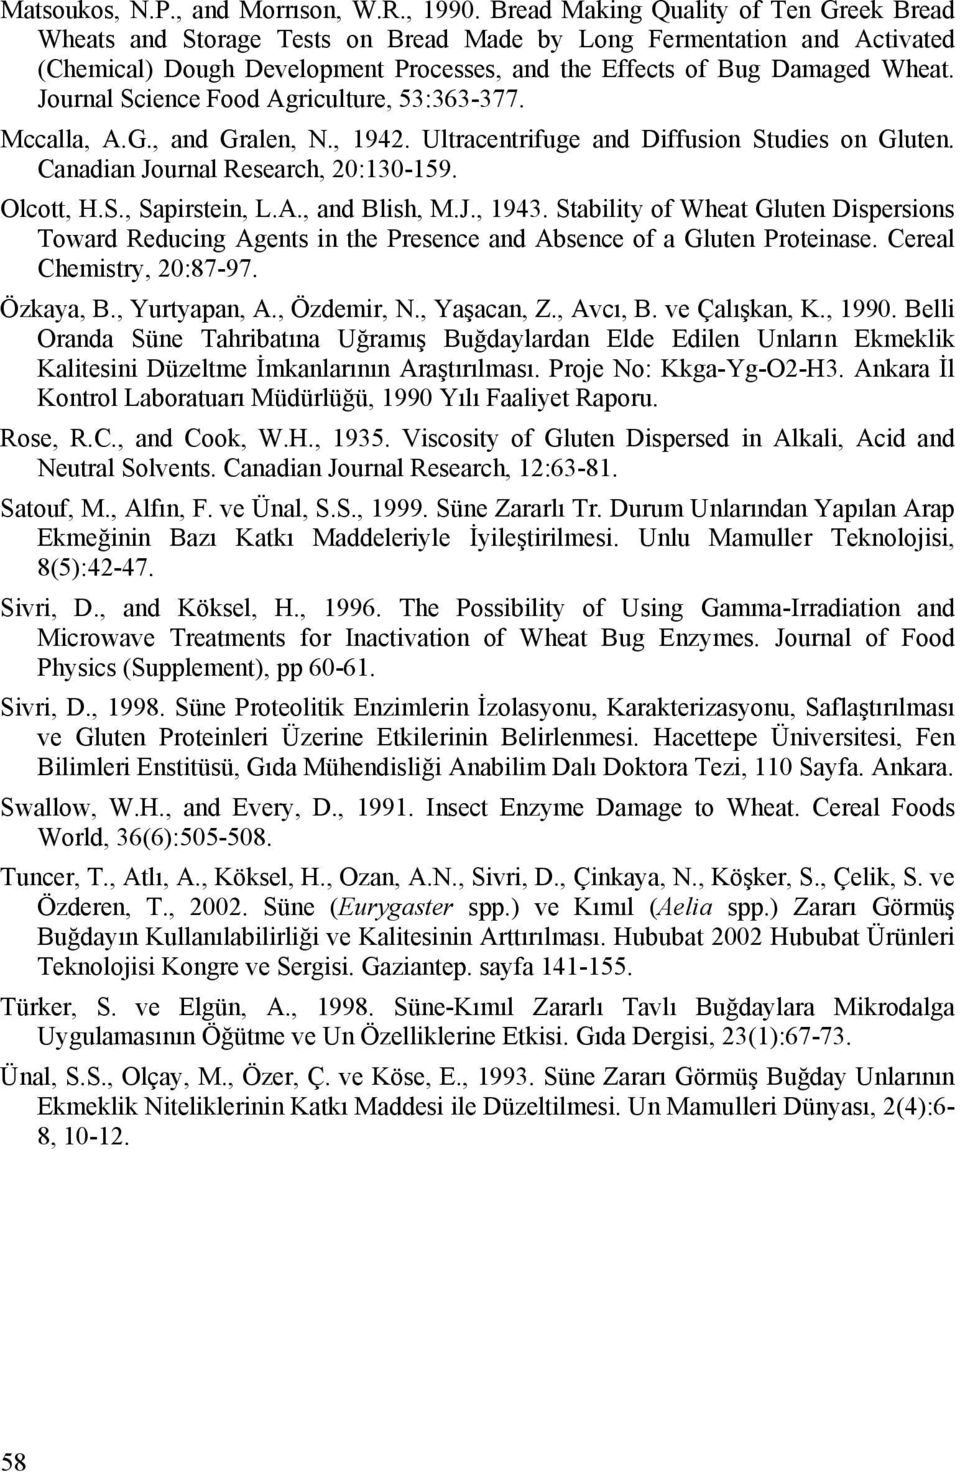 Journal Science Food Agriculture, 53:363-377. Mccalla, A.G., and Gralen, N., 1942. Ultracentrifuge and Diffusion Studies on Gluten. Canadian Journal Research, 20:130-159. Olcott, H.S., Sapirstein, L.